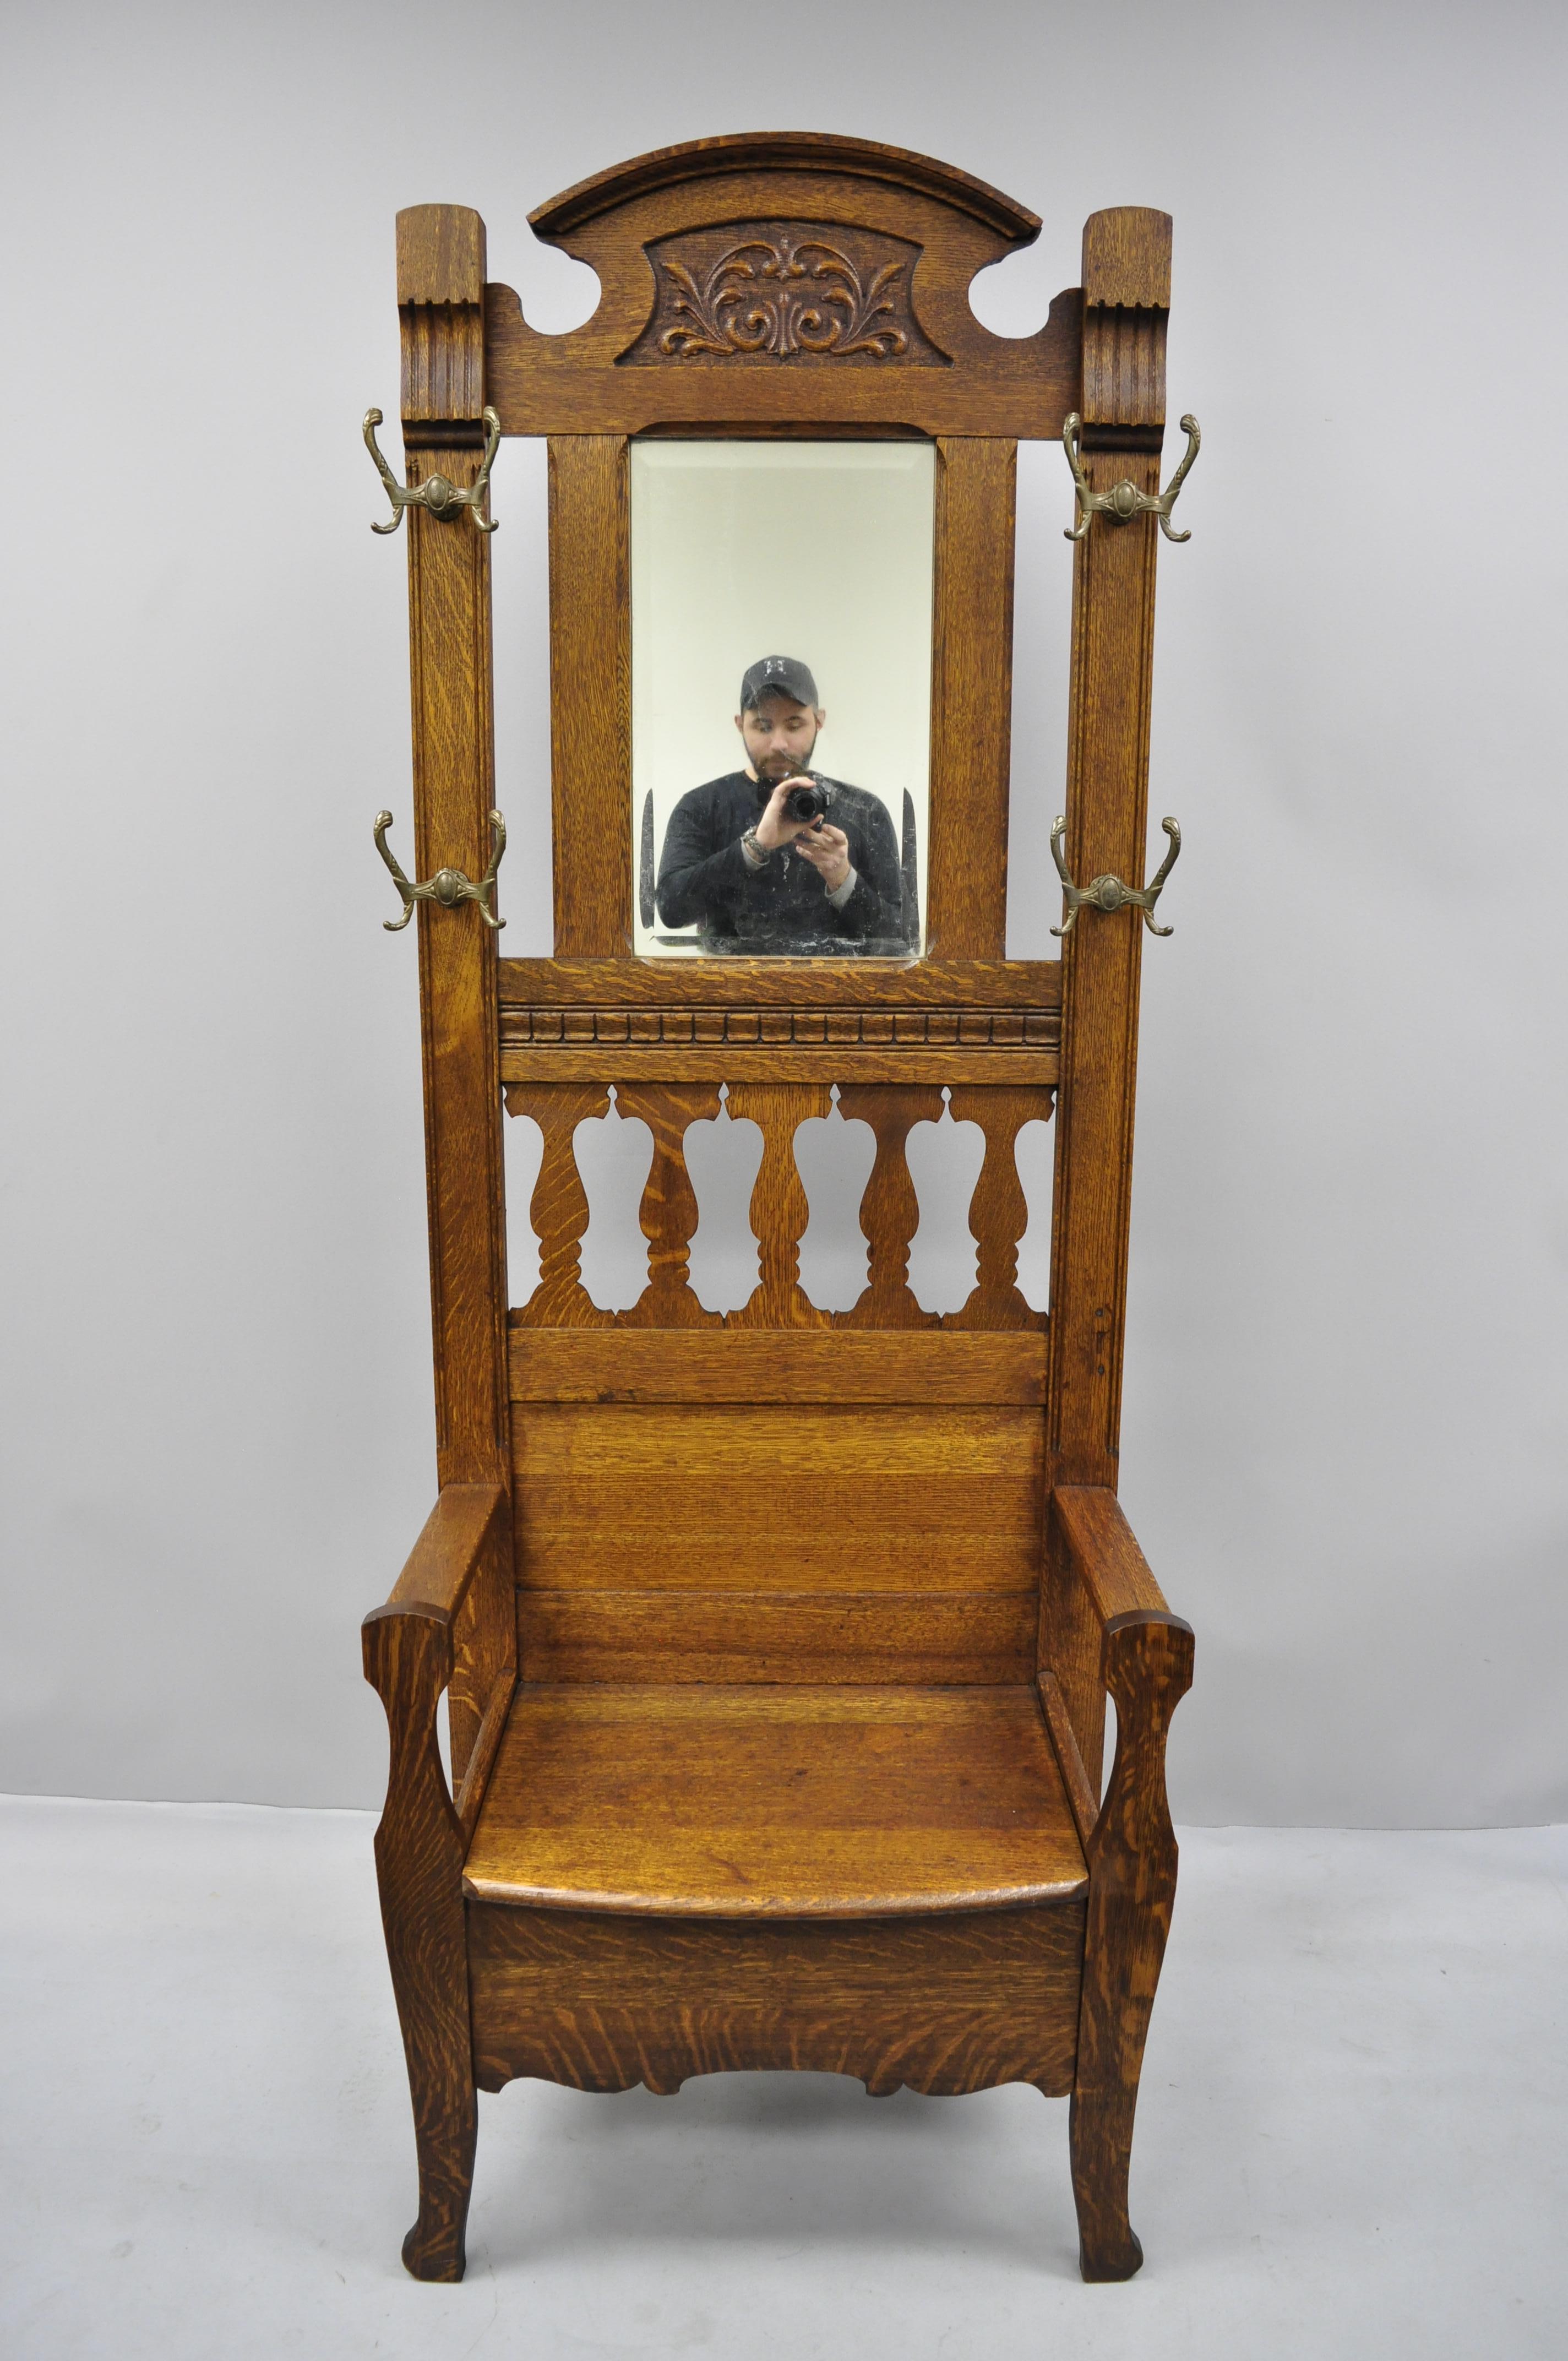 Antique Eastlake Victorian golden tiger oak hall coat tree with storage bench. Item features (4) double coat hooks, beveled glass mirror, solid wood construction, beautiful wood grain and nicely carved details; very nice antique item, circa 1900.